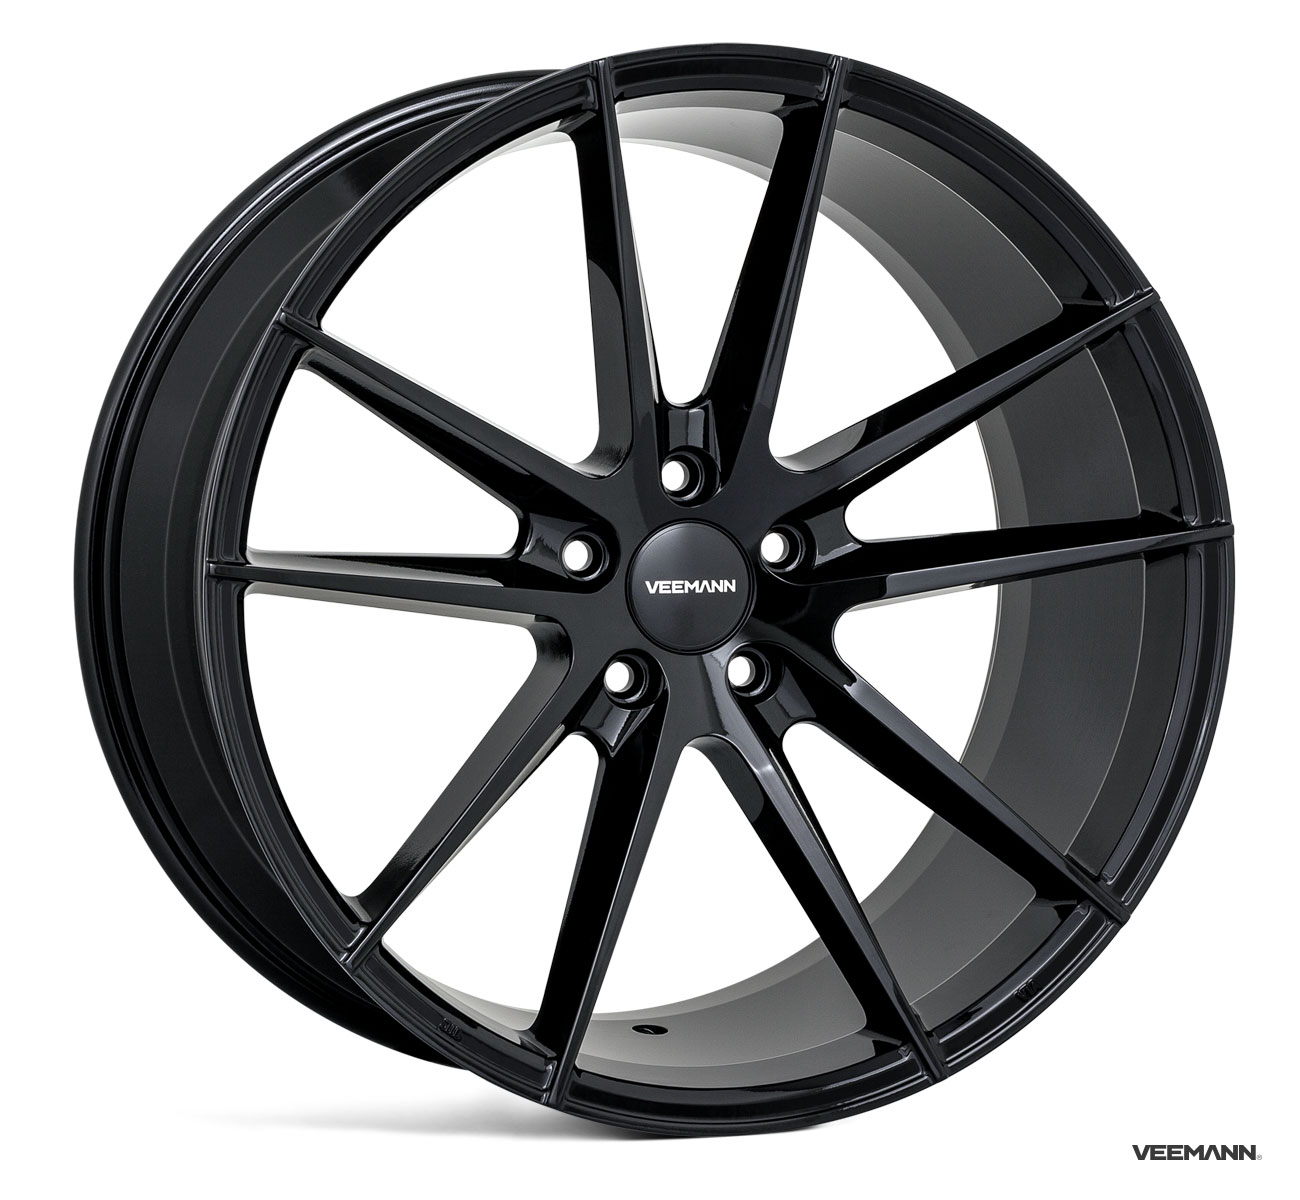 NEW 20" VEEMANN V-FS25 ALLOY WHEELS IN GLOSS BLACK WITH WIDER 10" REARS